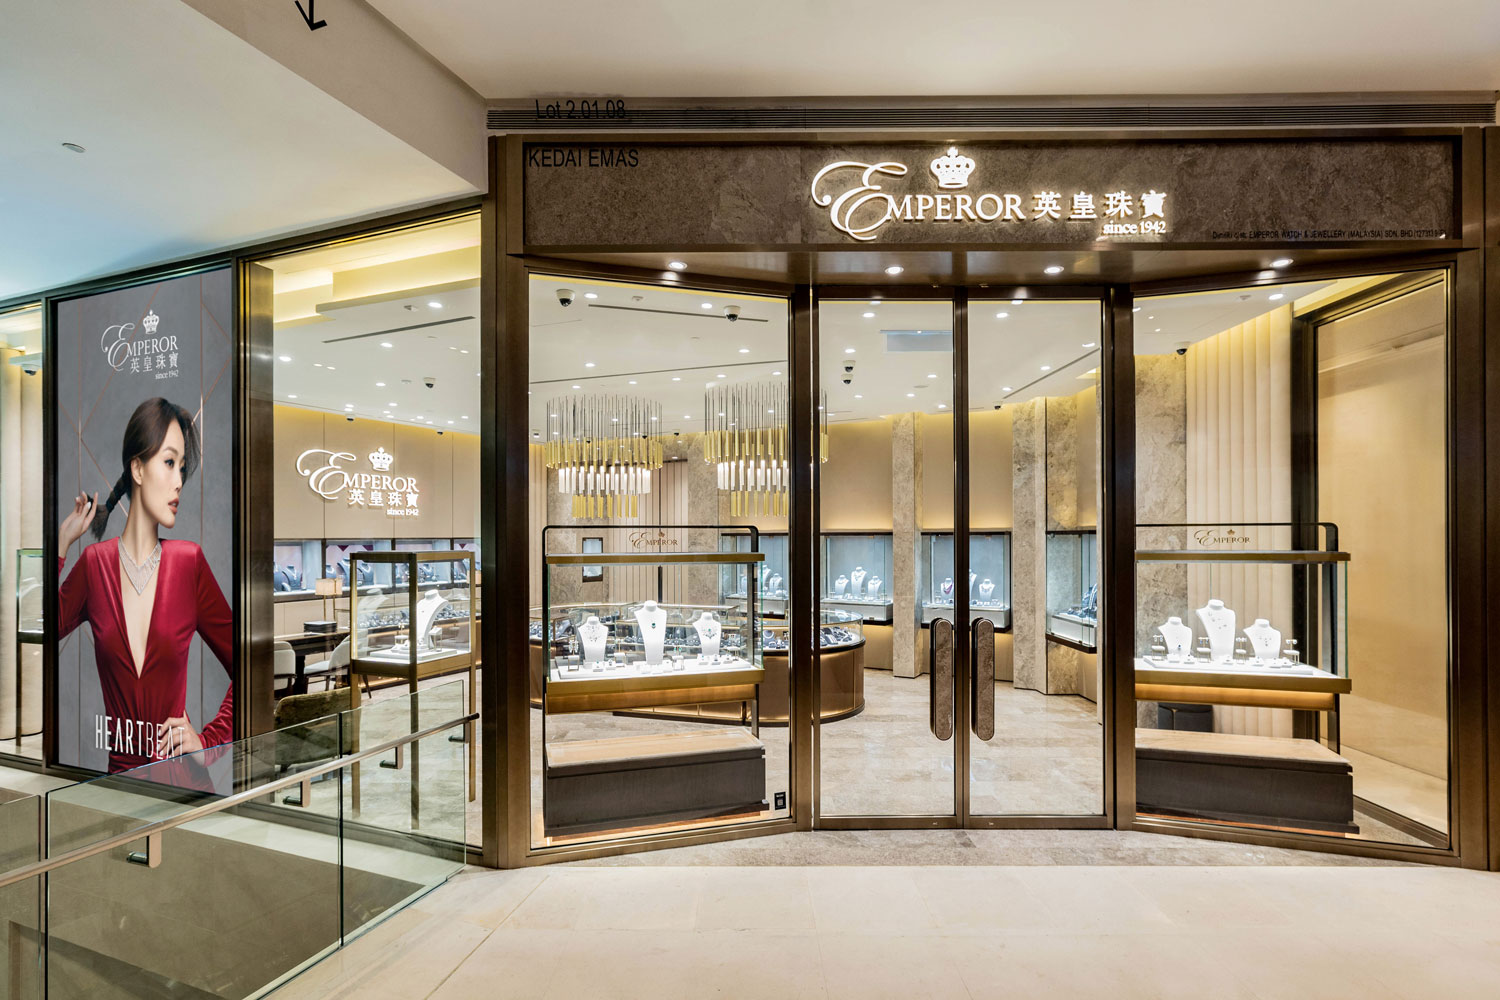 Emperor Jewellery’s first ever flagship store in Pavilion Kuala Lumpur spans across 2,012 sqft.